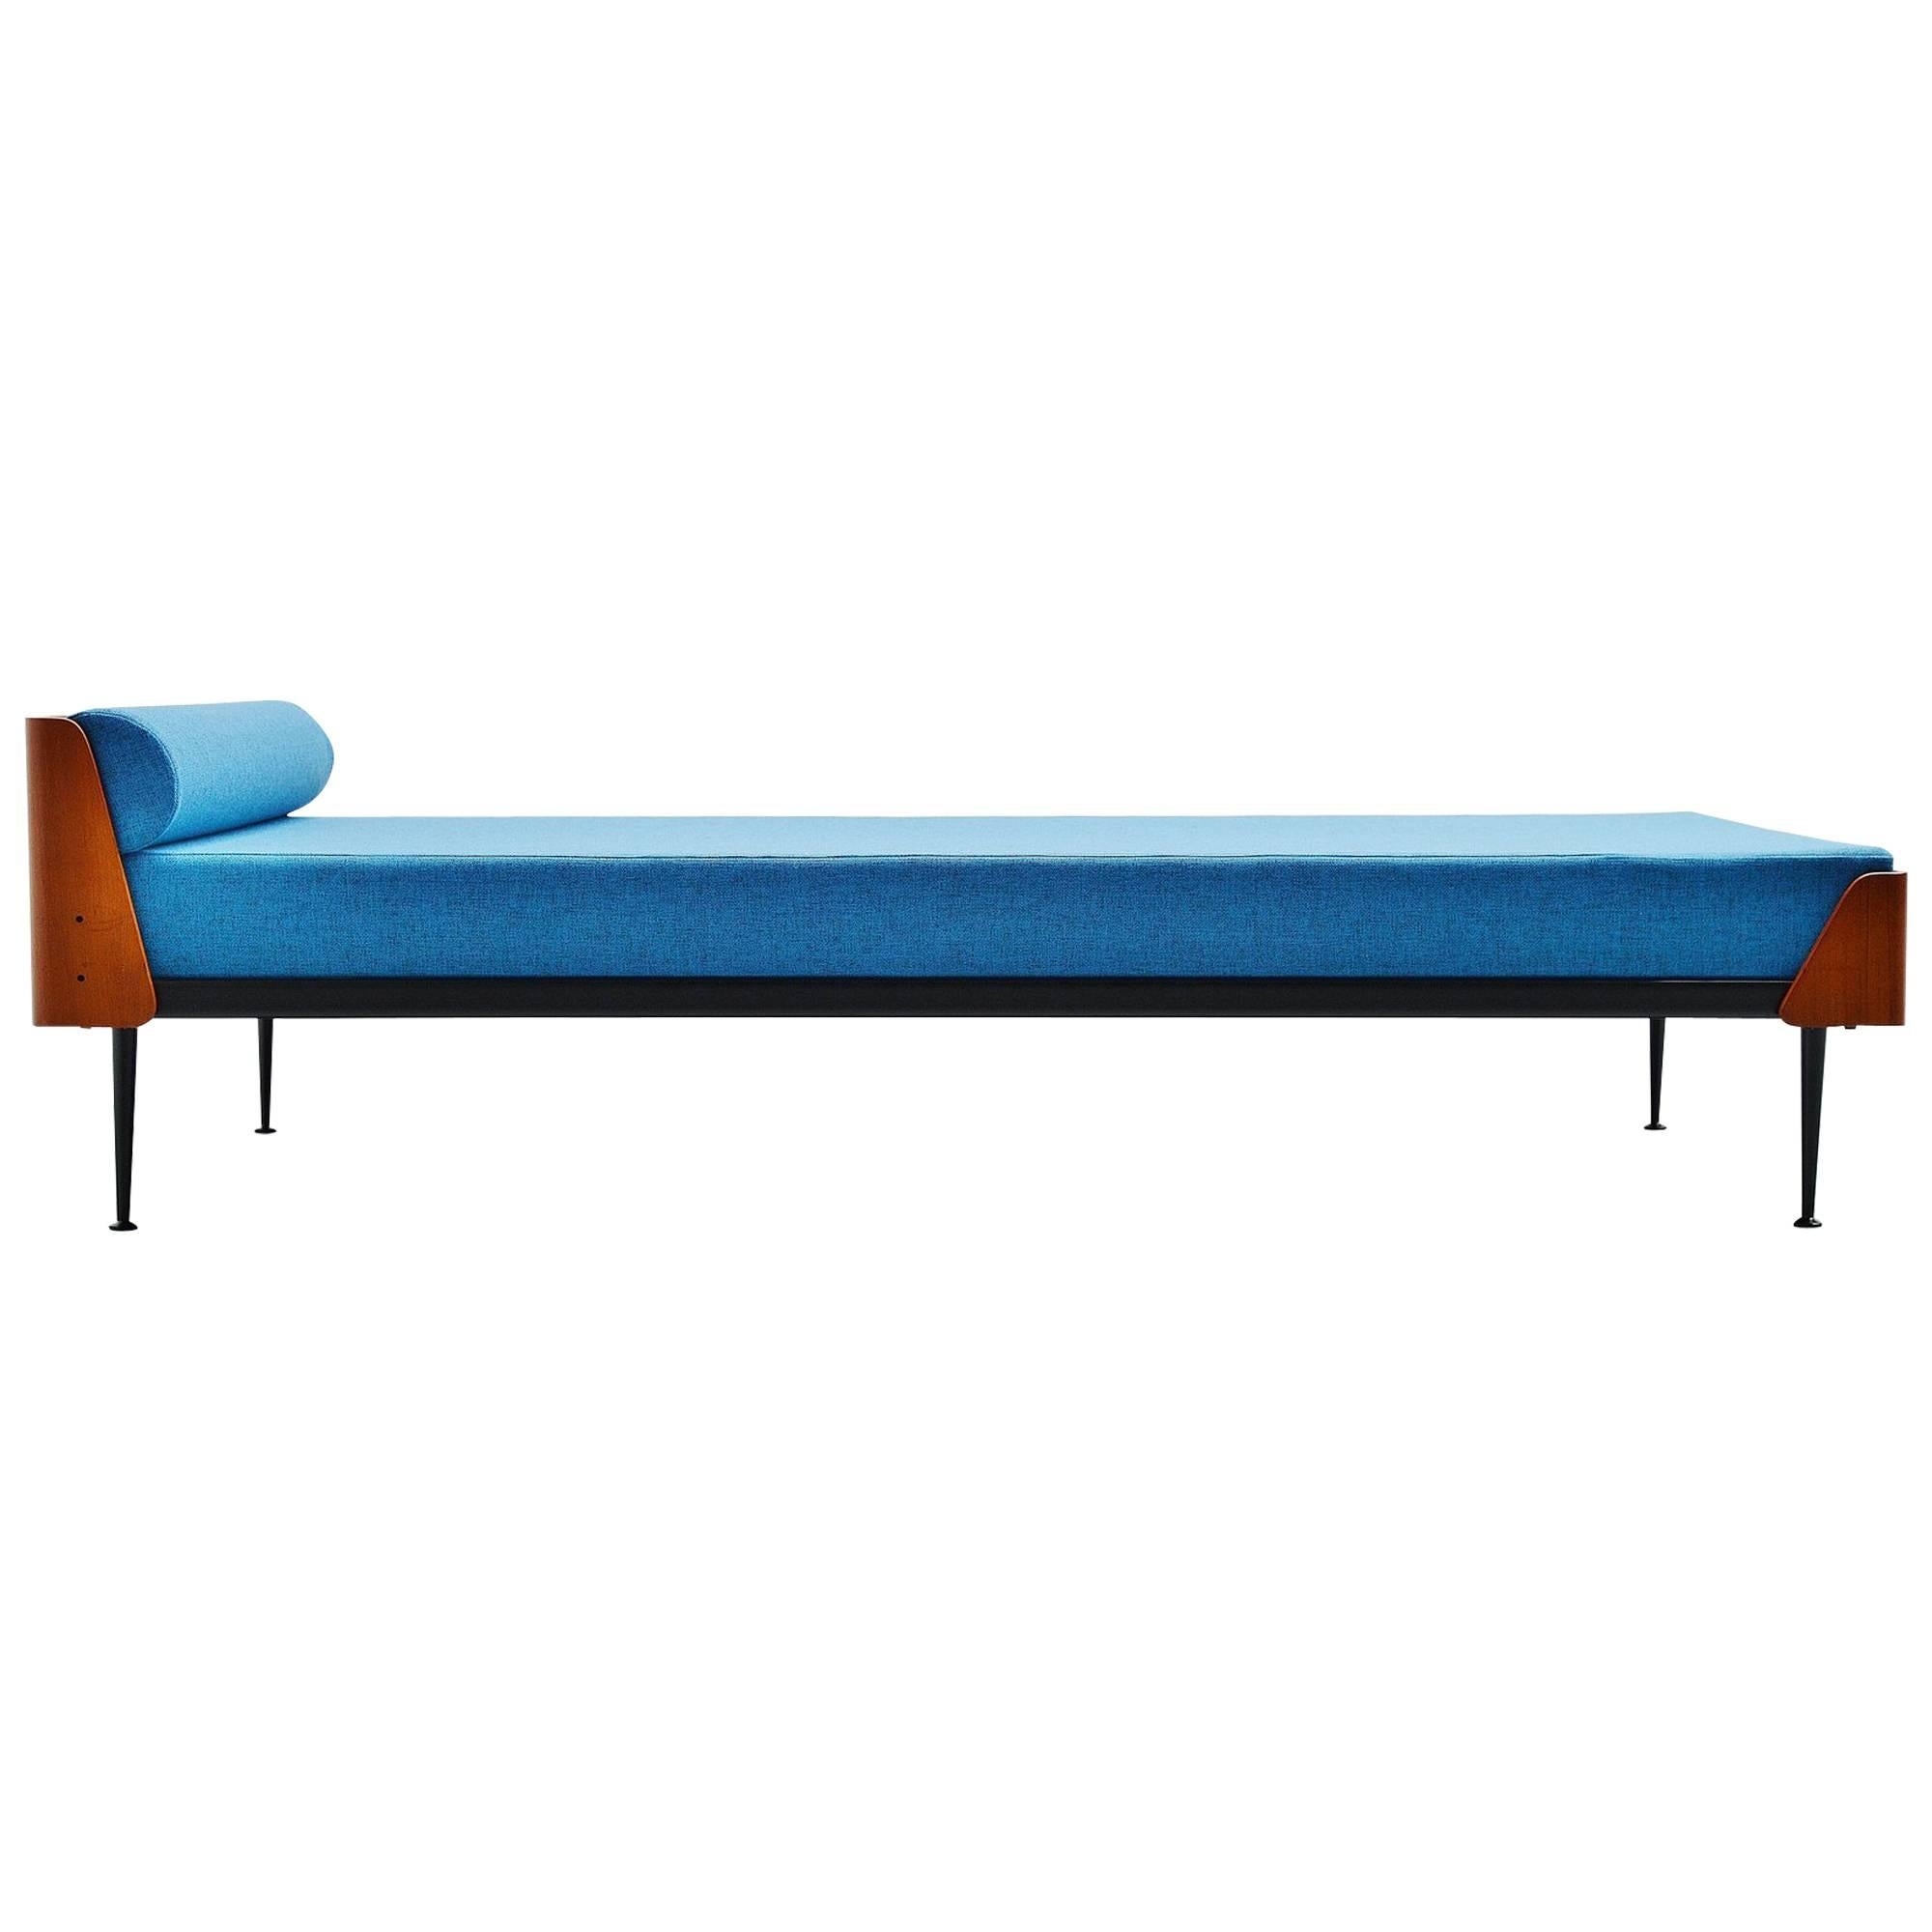 Friso Kramer Euroika Daybed Auping Holland, 1963